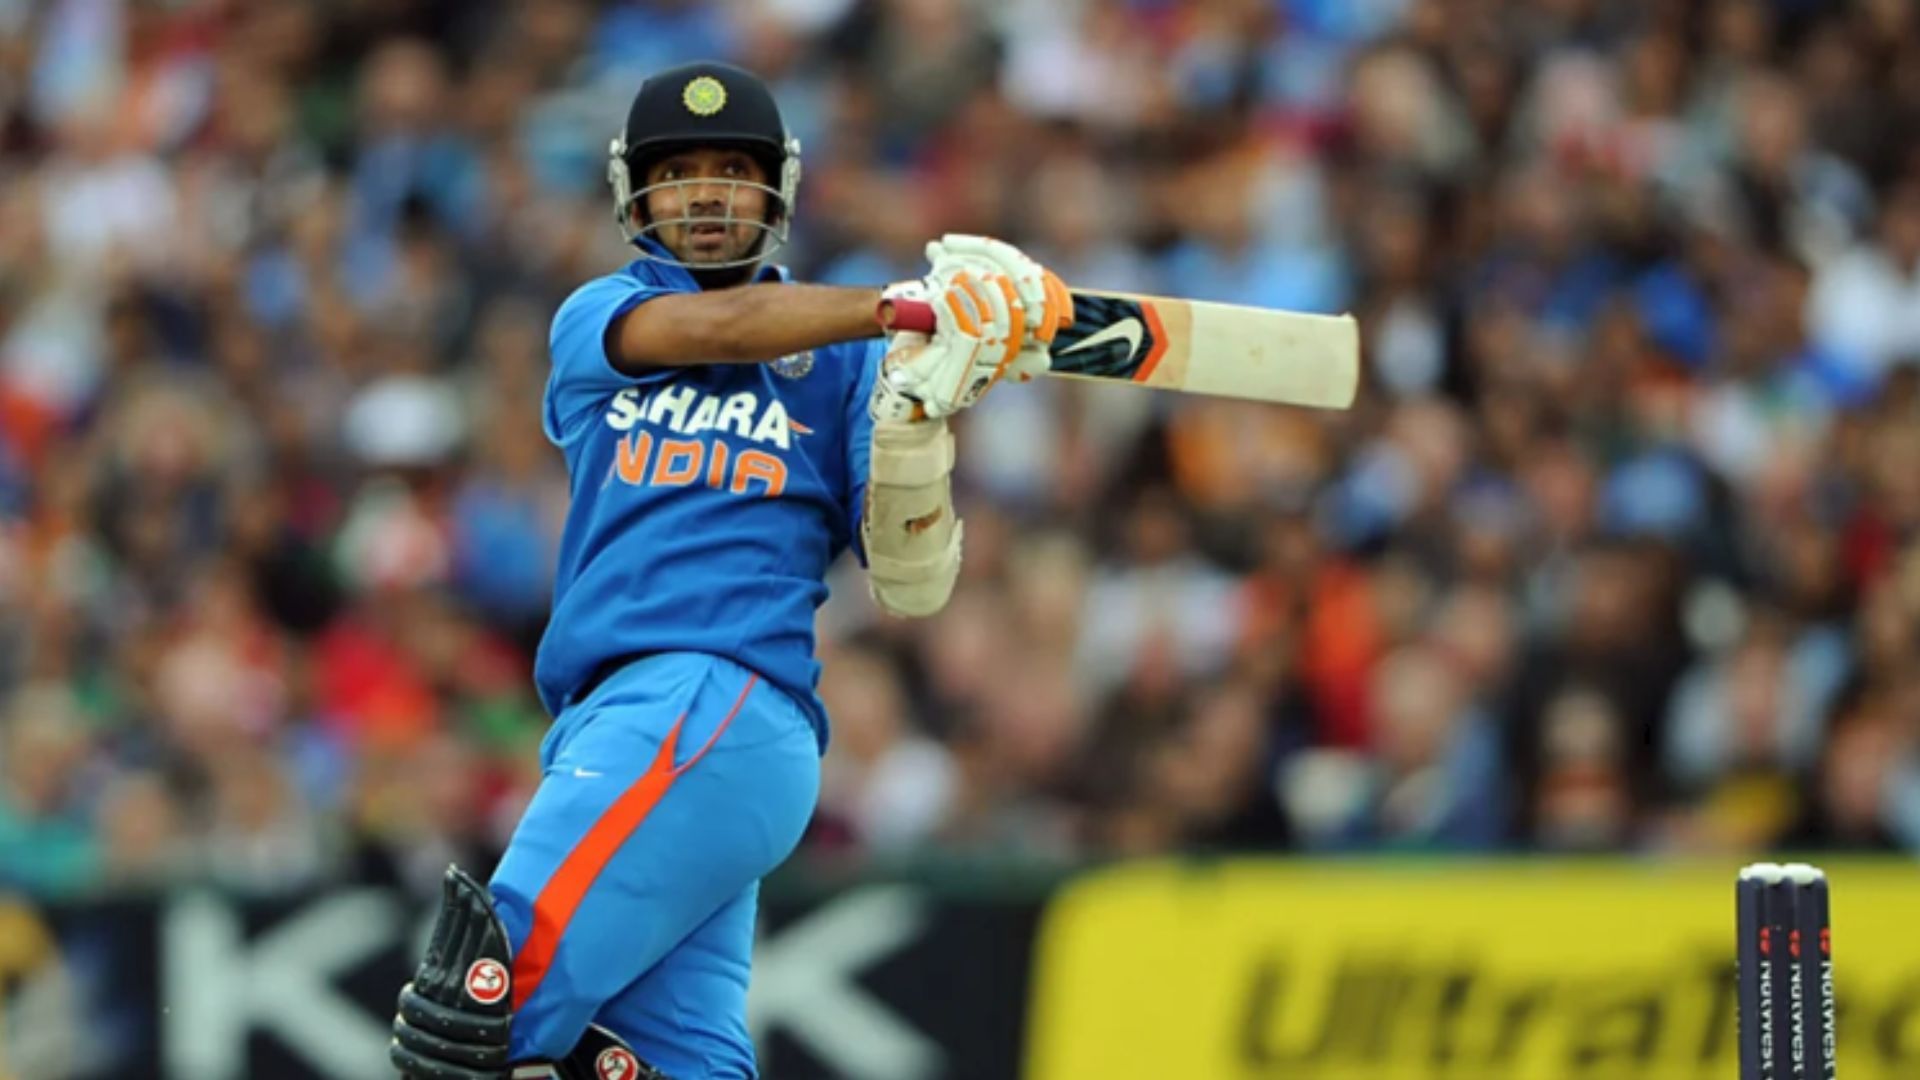 Ajinkya Rahane plays a stroke during his knock of 61 in that game. (Pic: Getty)